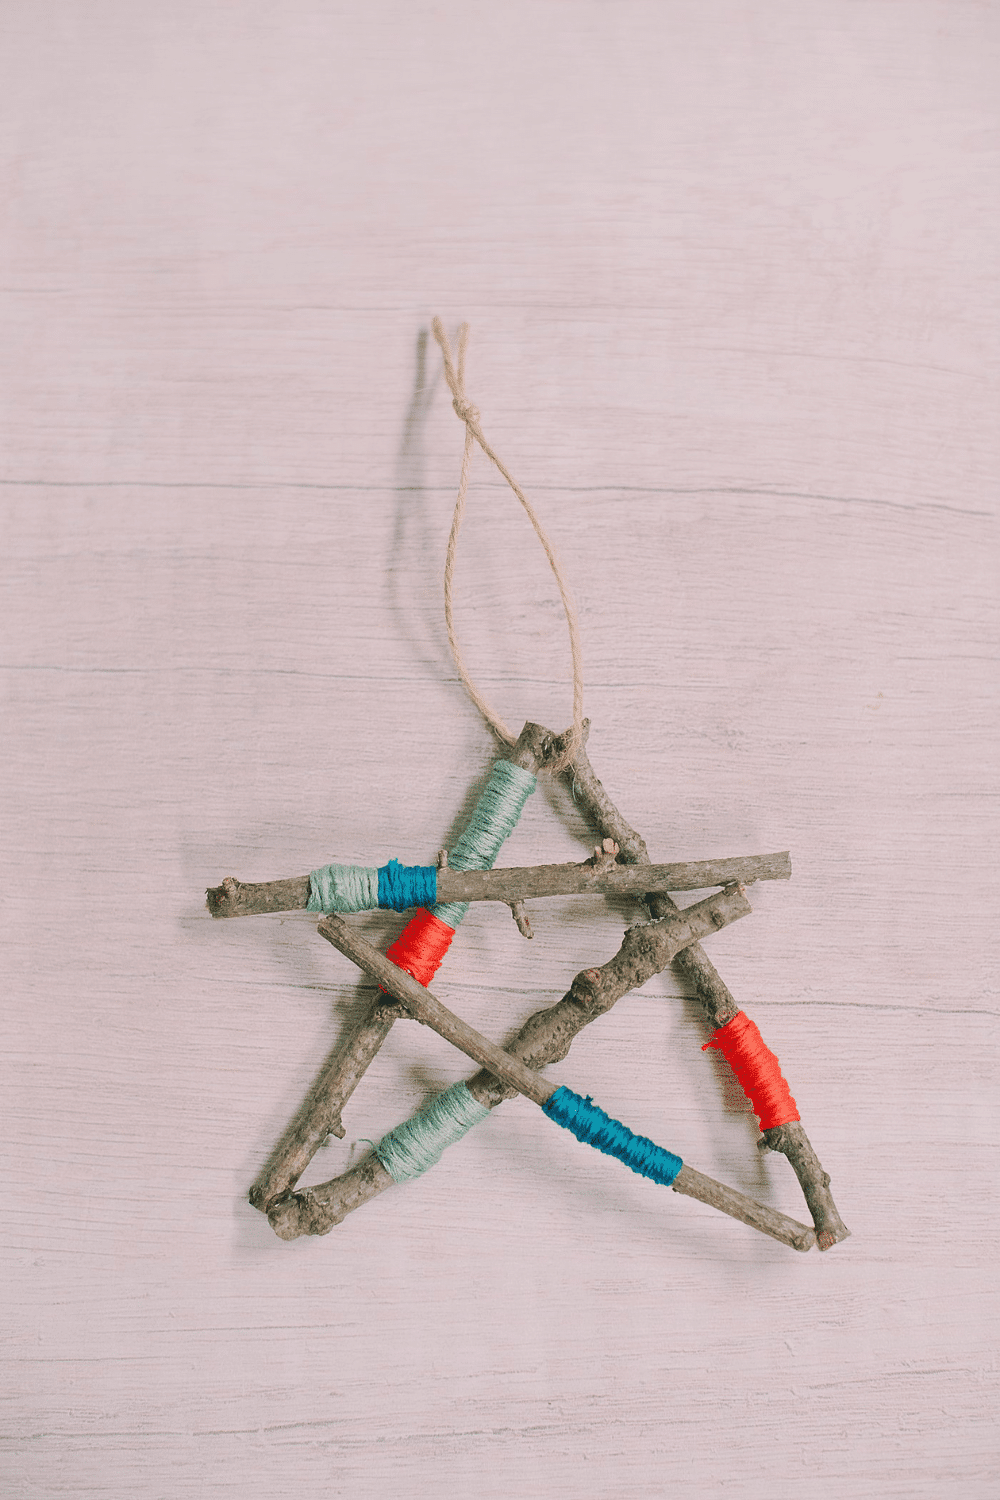 How to Make a Star Ornament out of Embroidery Floss Wrapped Sticks